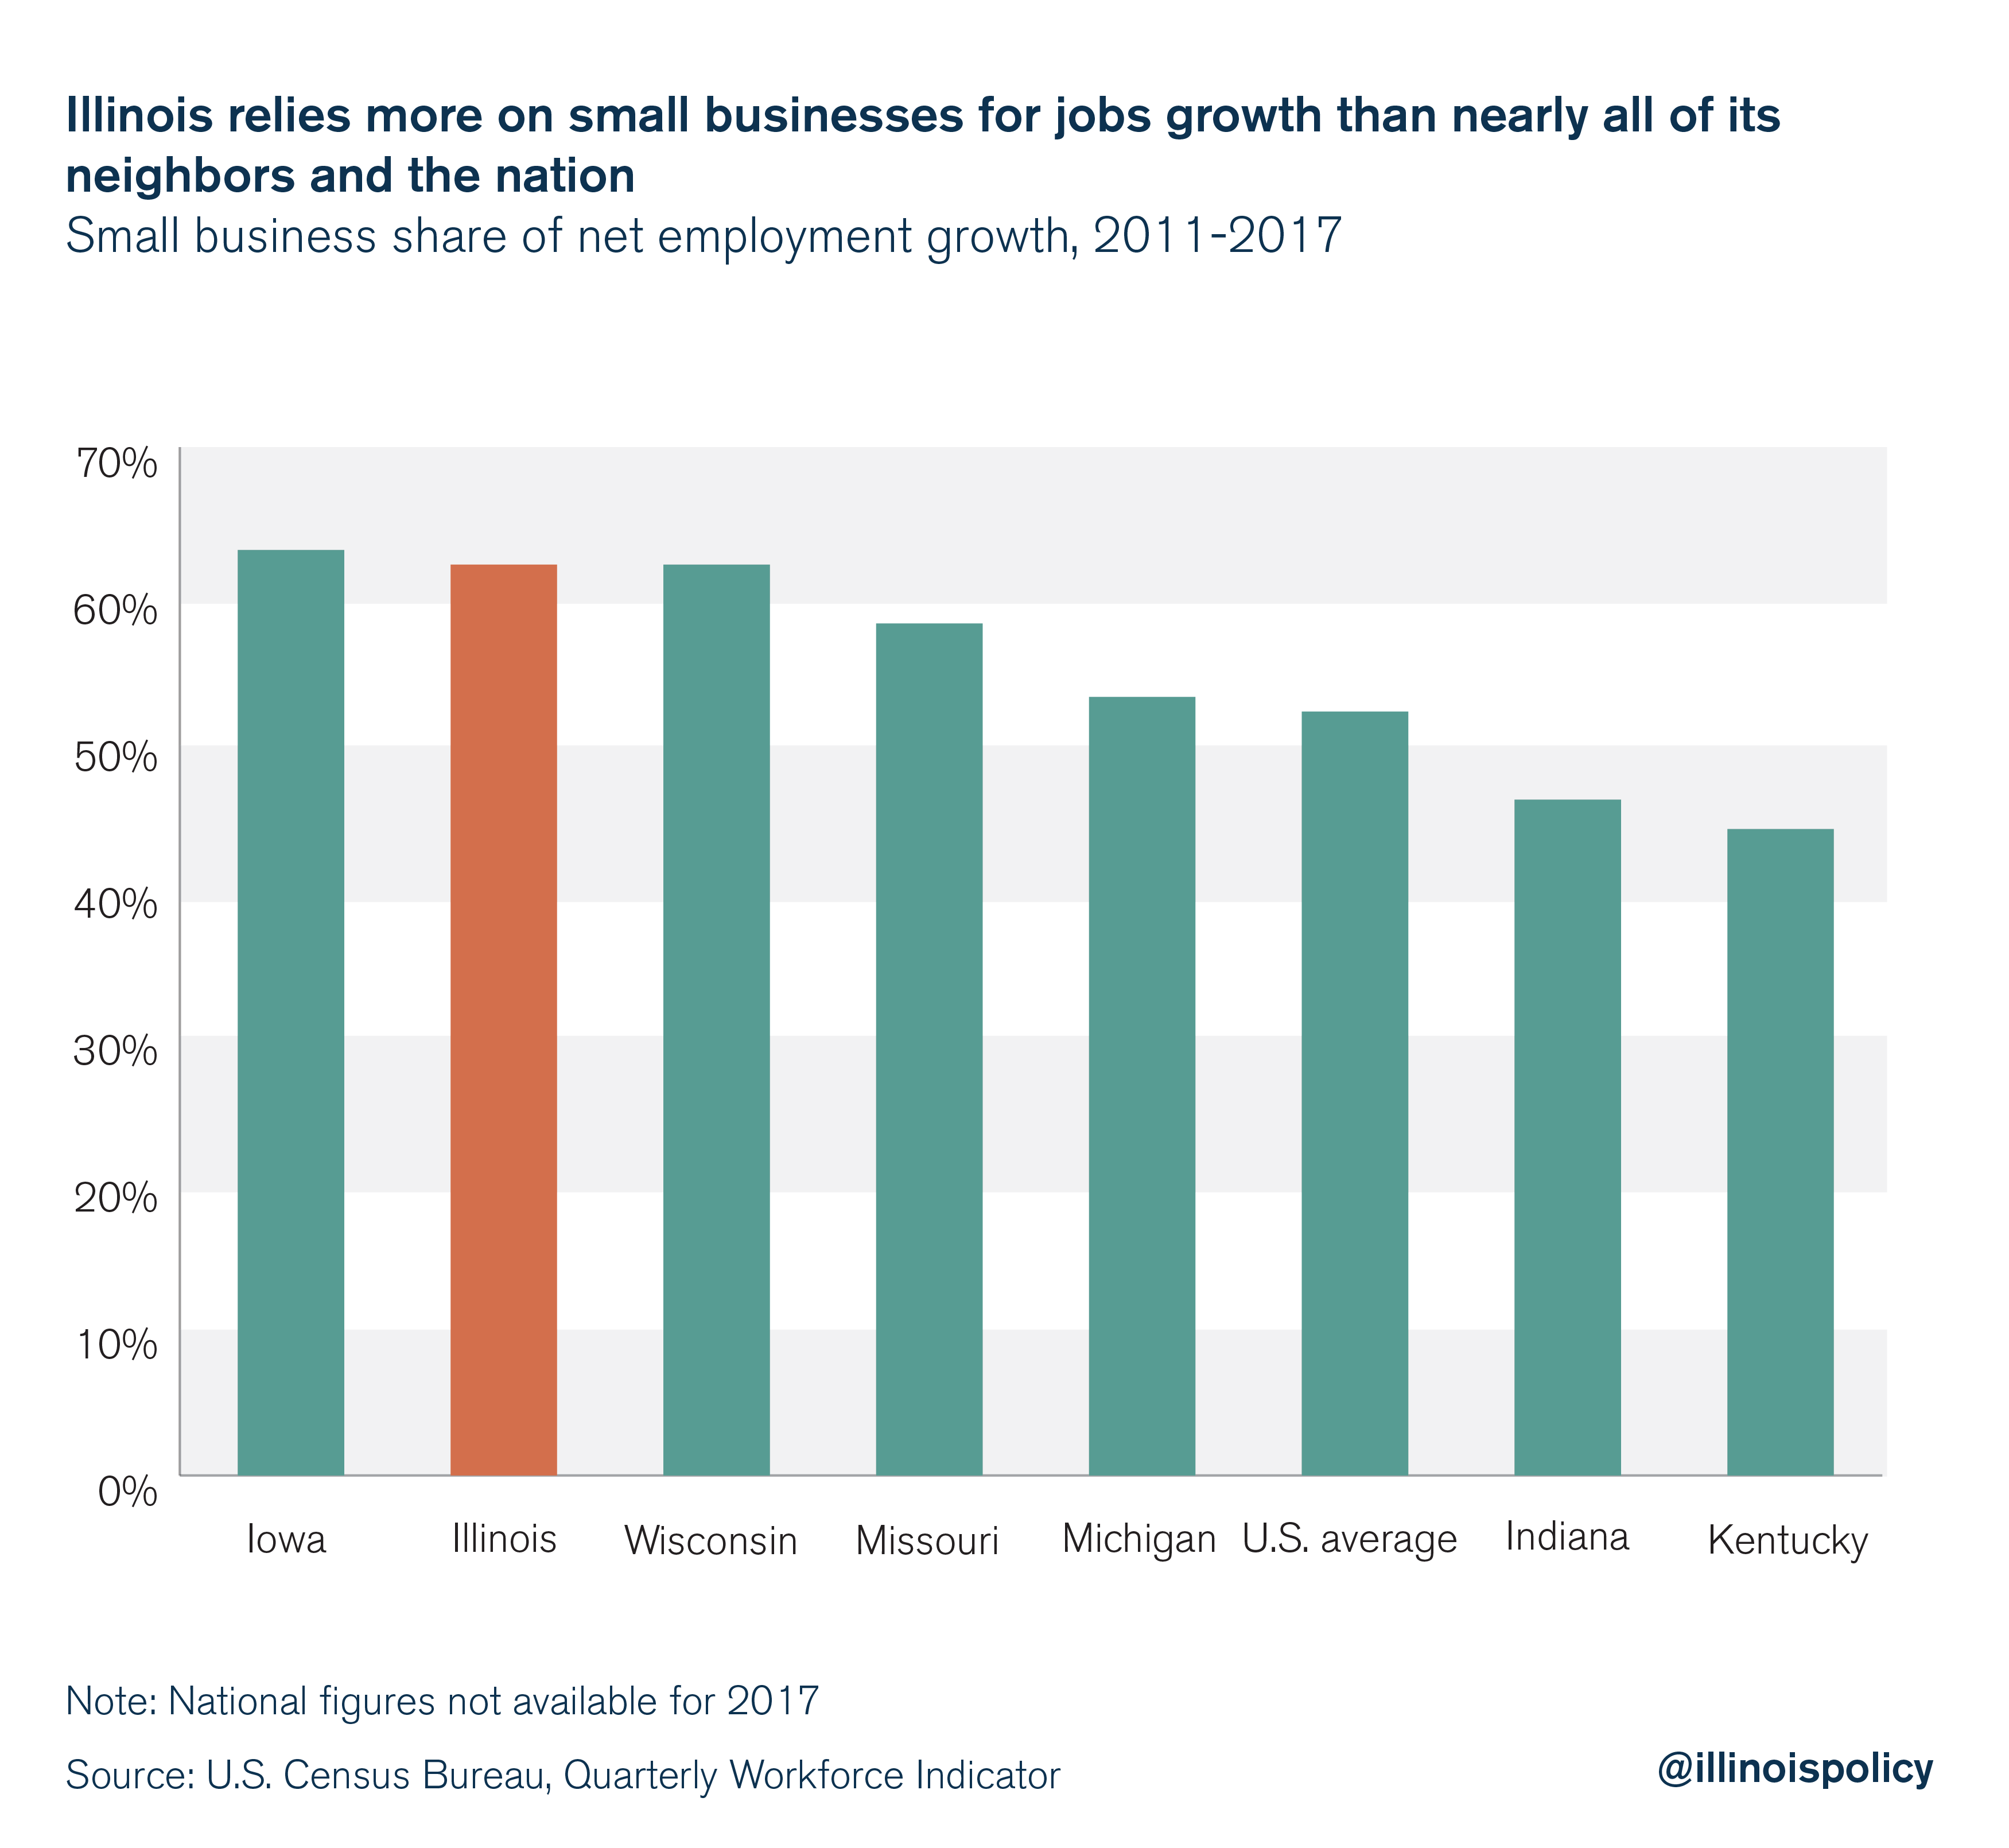 Illinois relies more on small businesses for jobs growth than nearly all of its neighbors and the nation